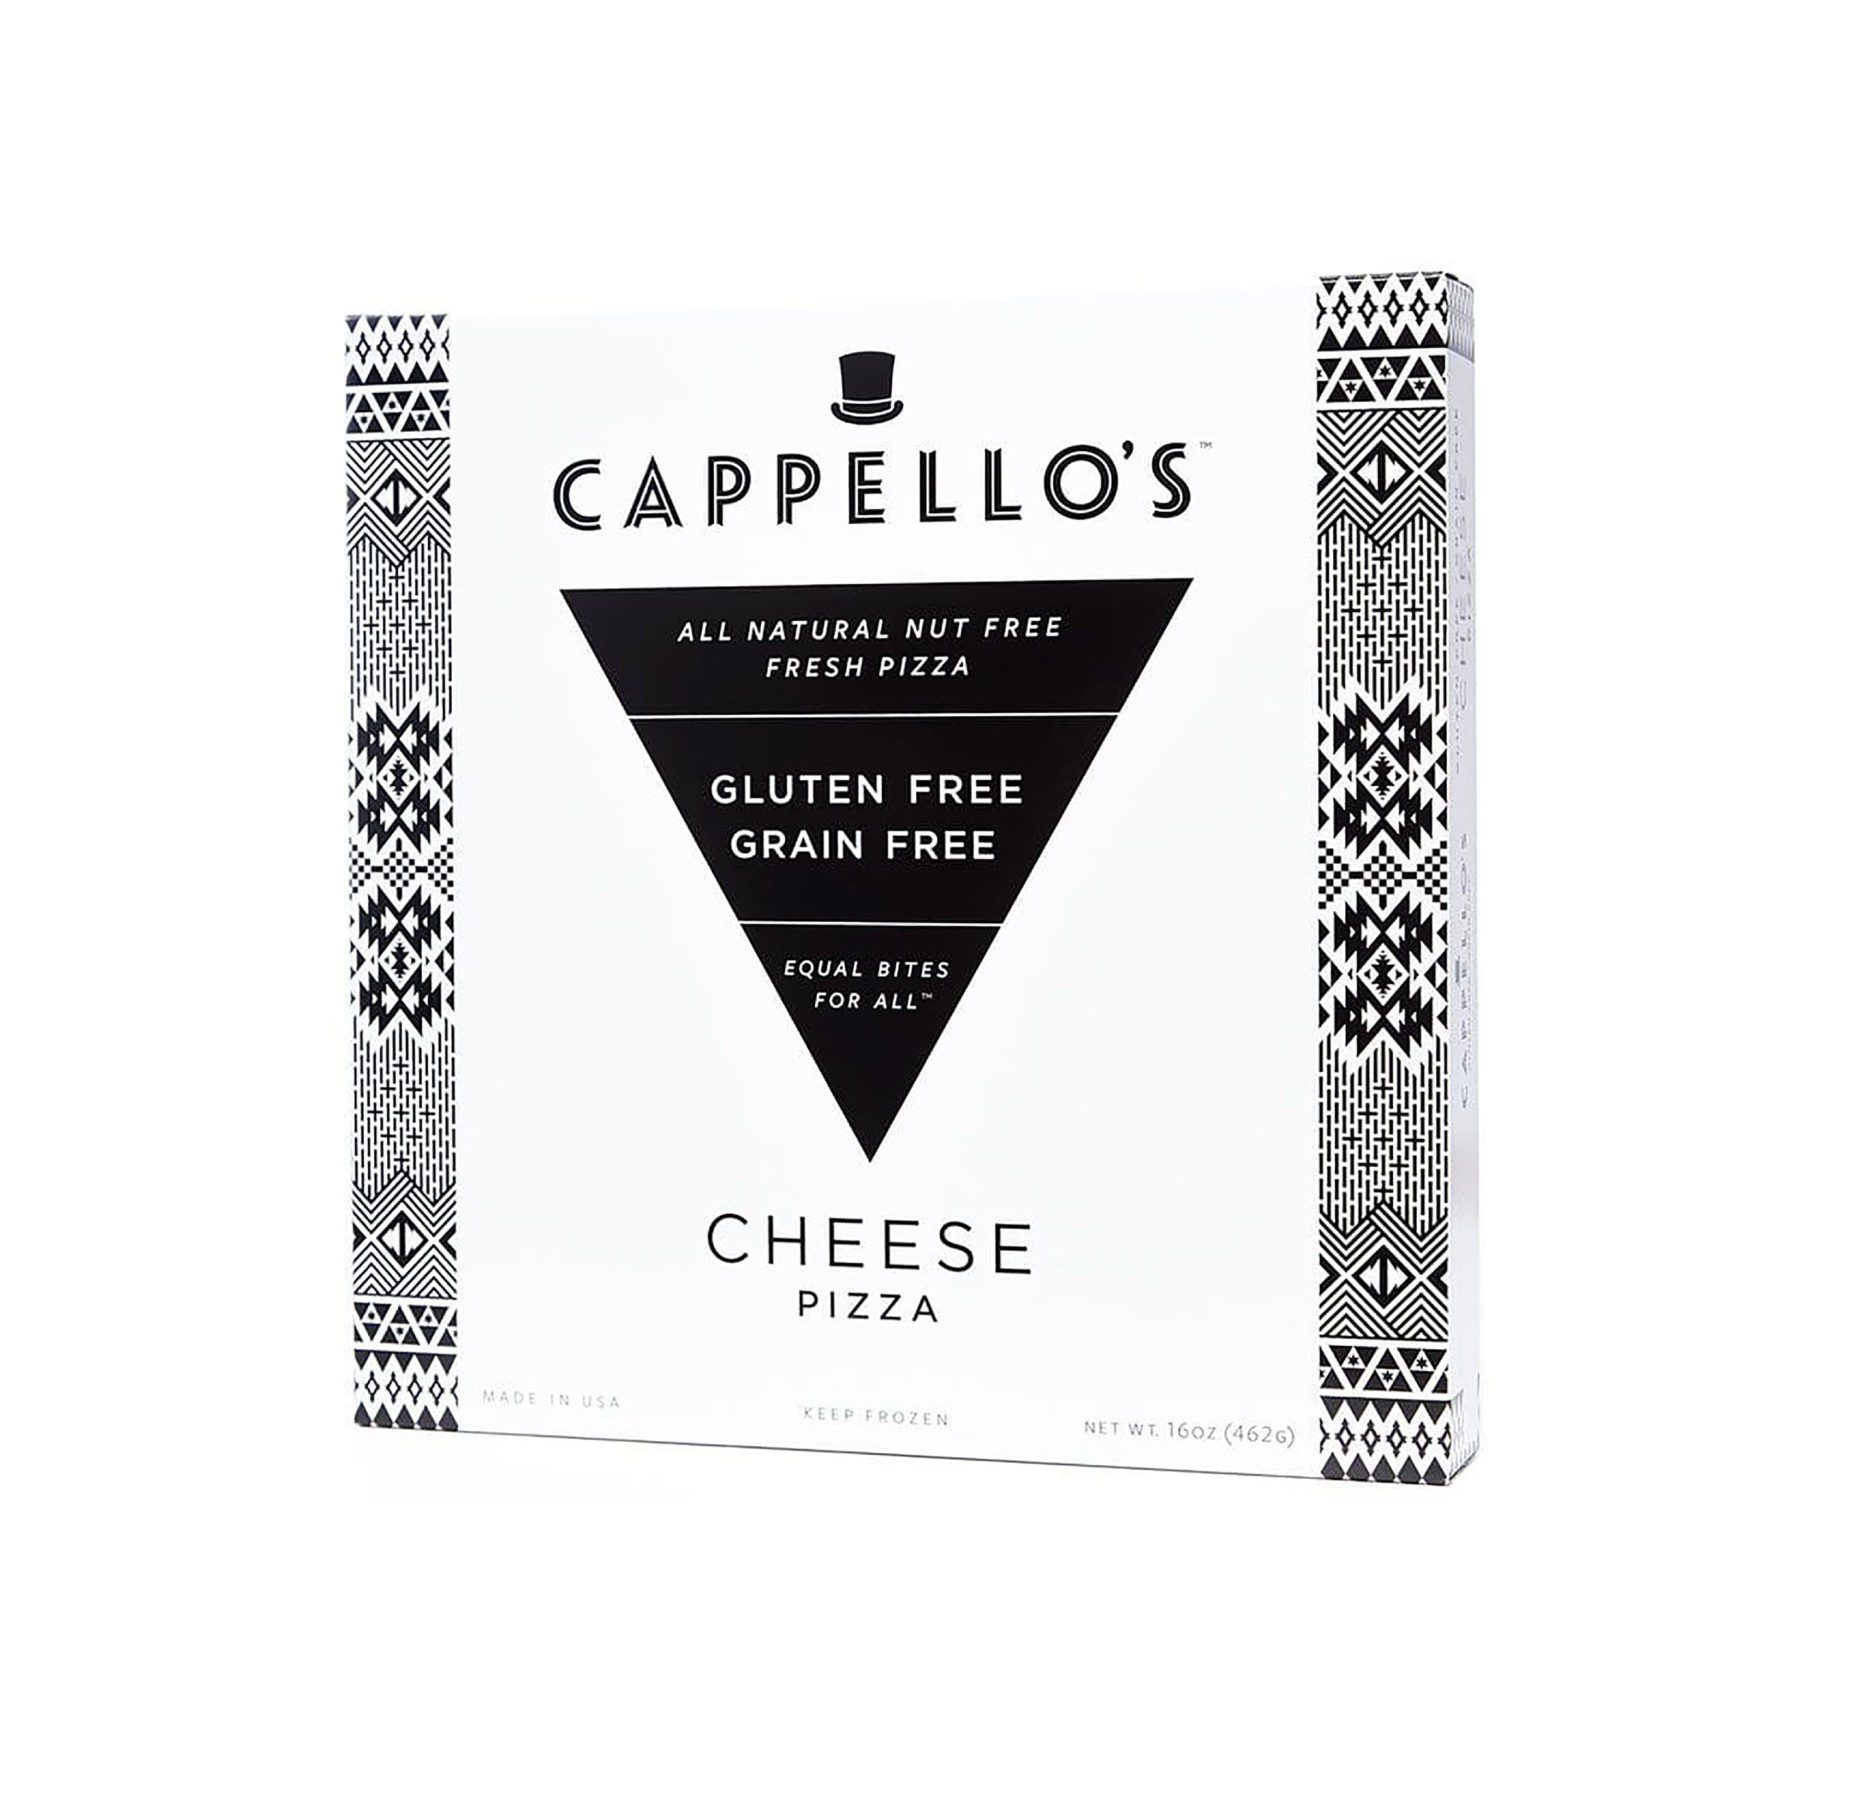 Capello's gluten free pizza review by our own GFF taste testers